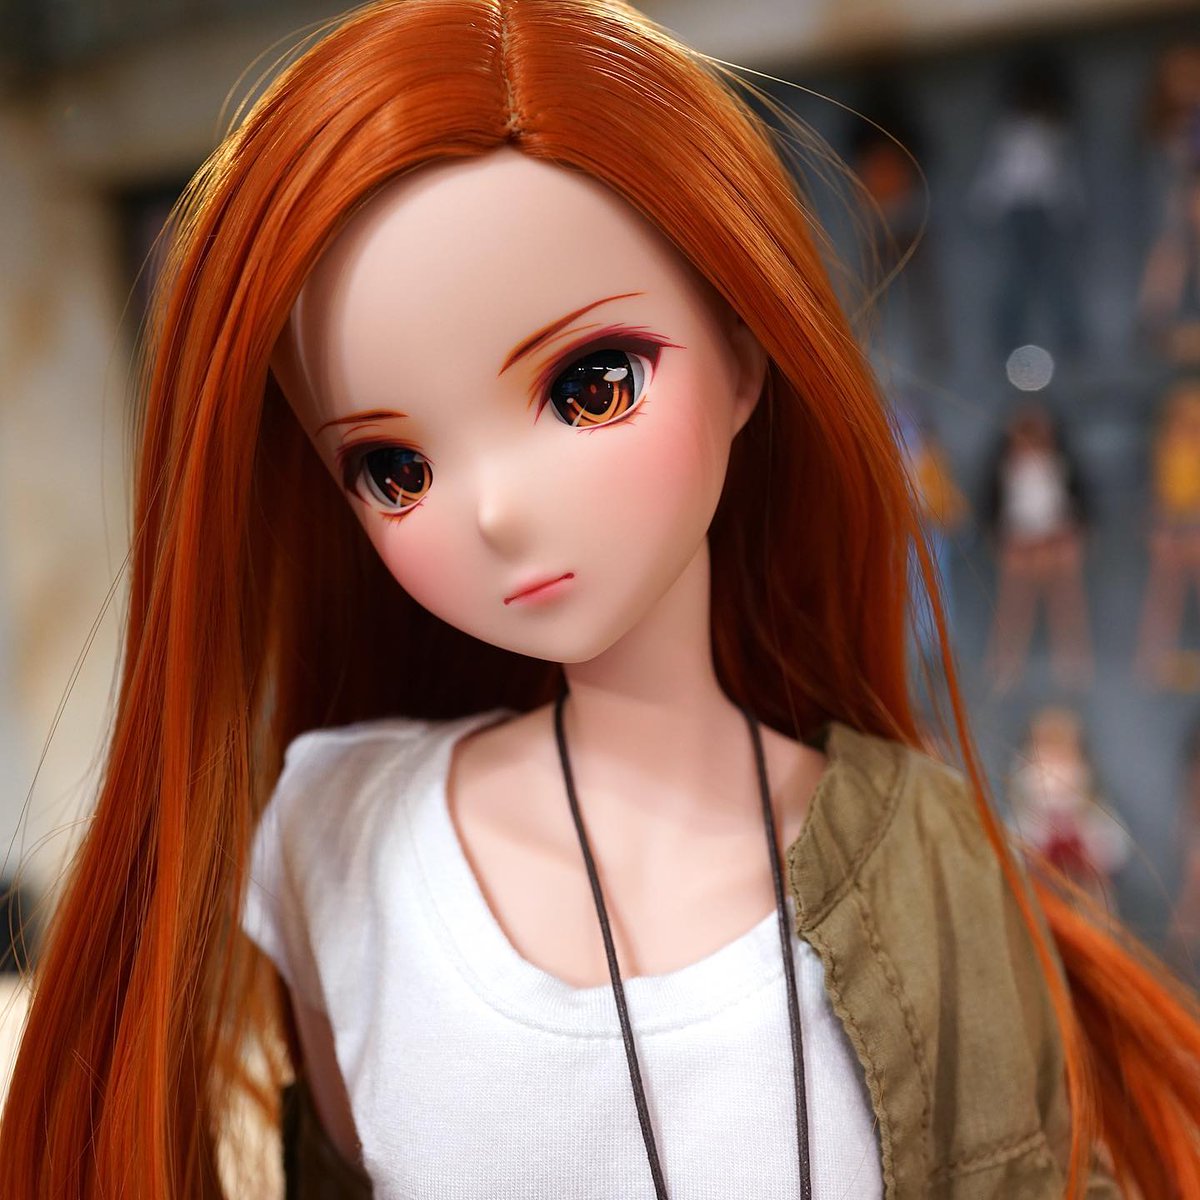 Another redhead Smart Doll prototype appears in the wild! 